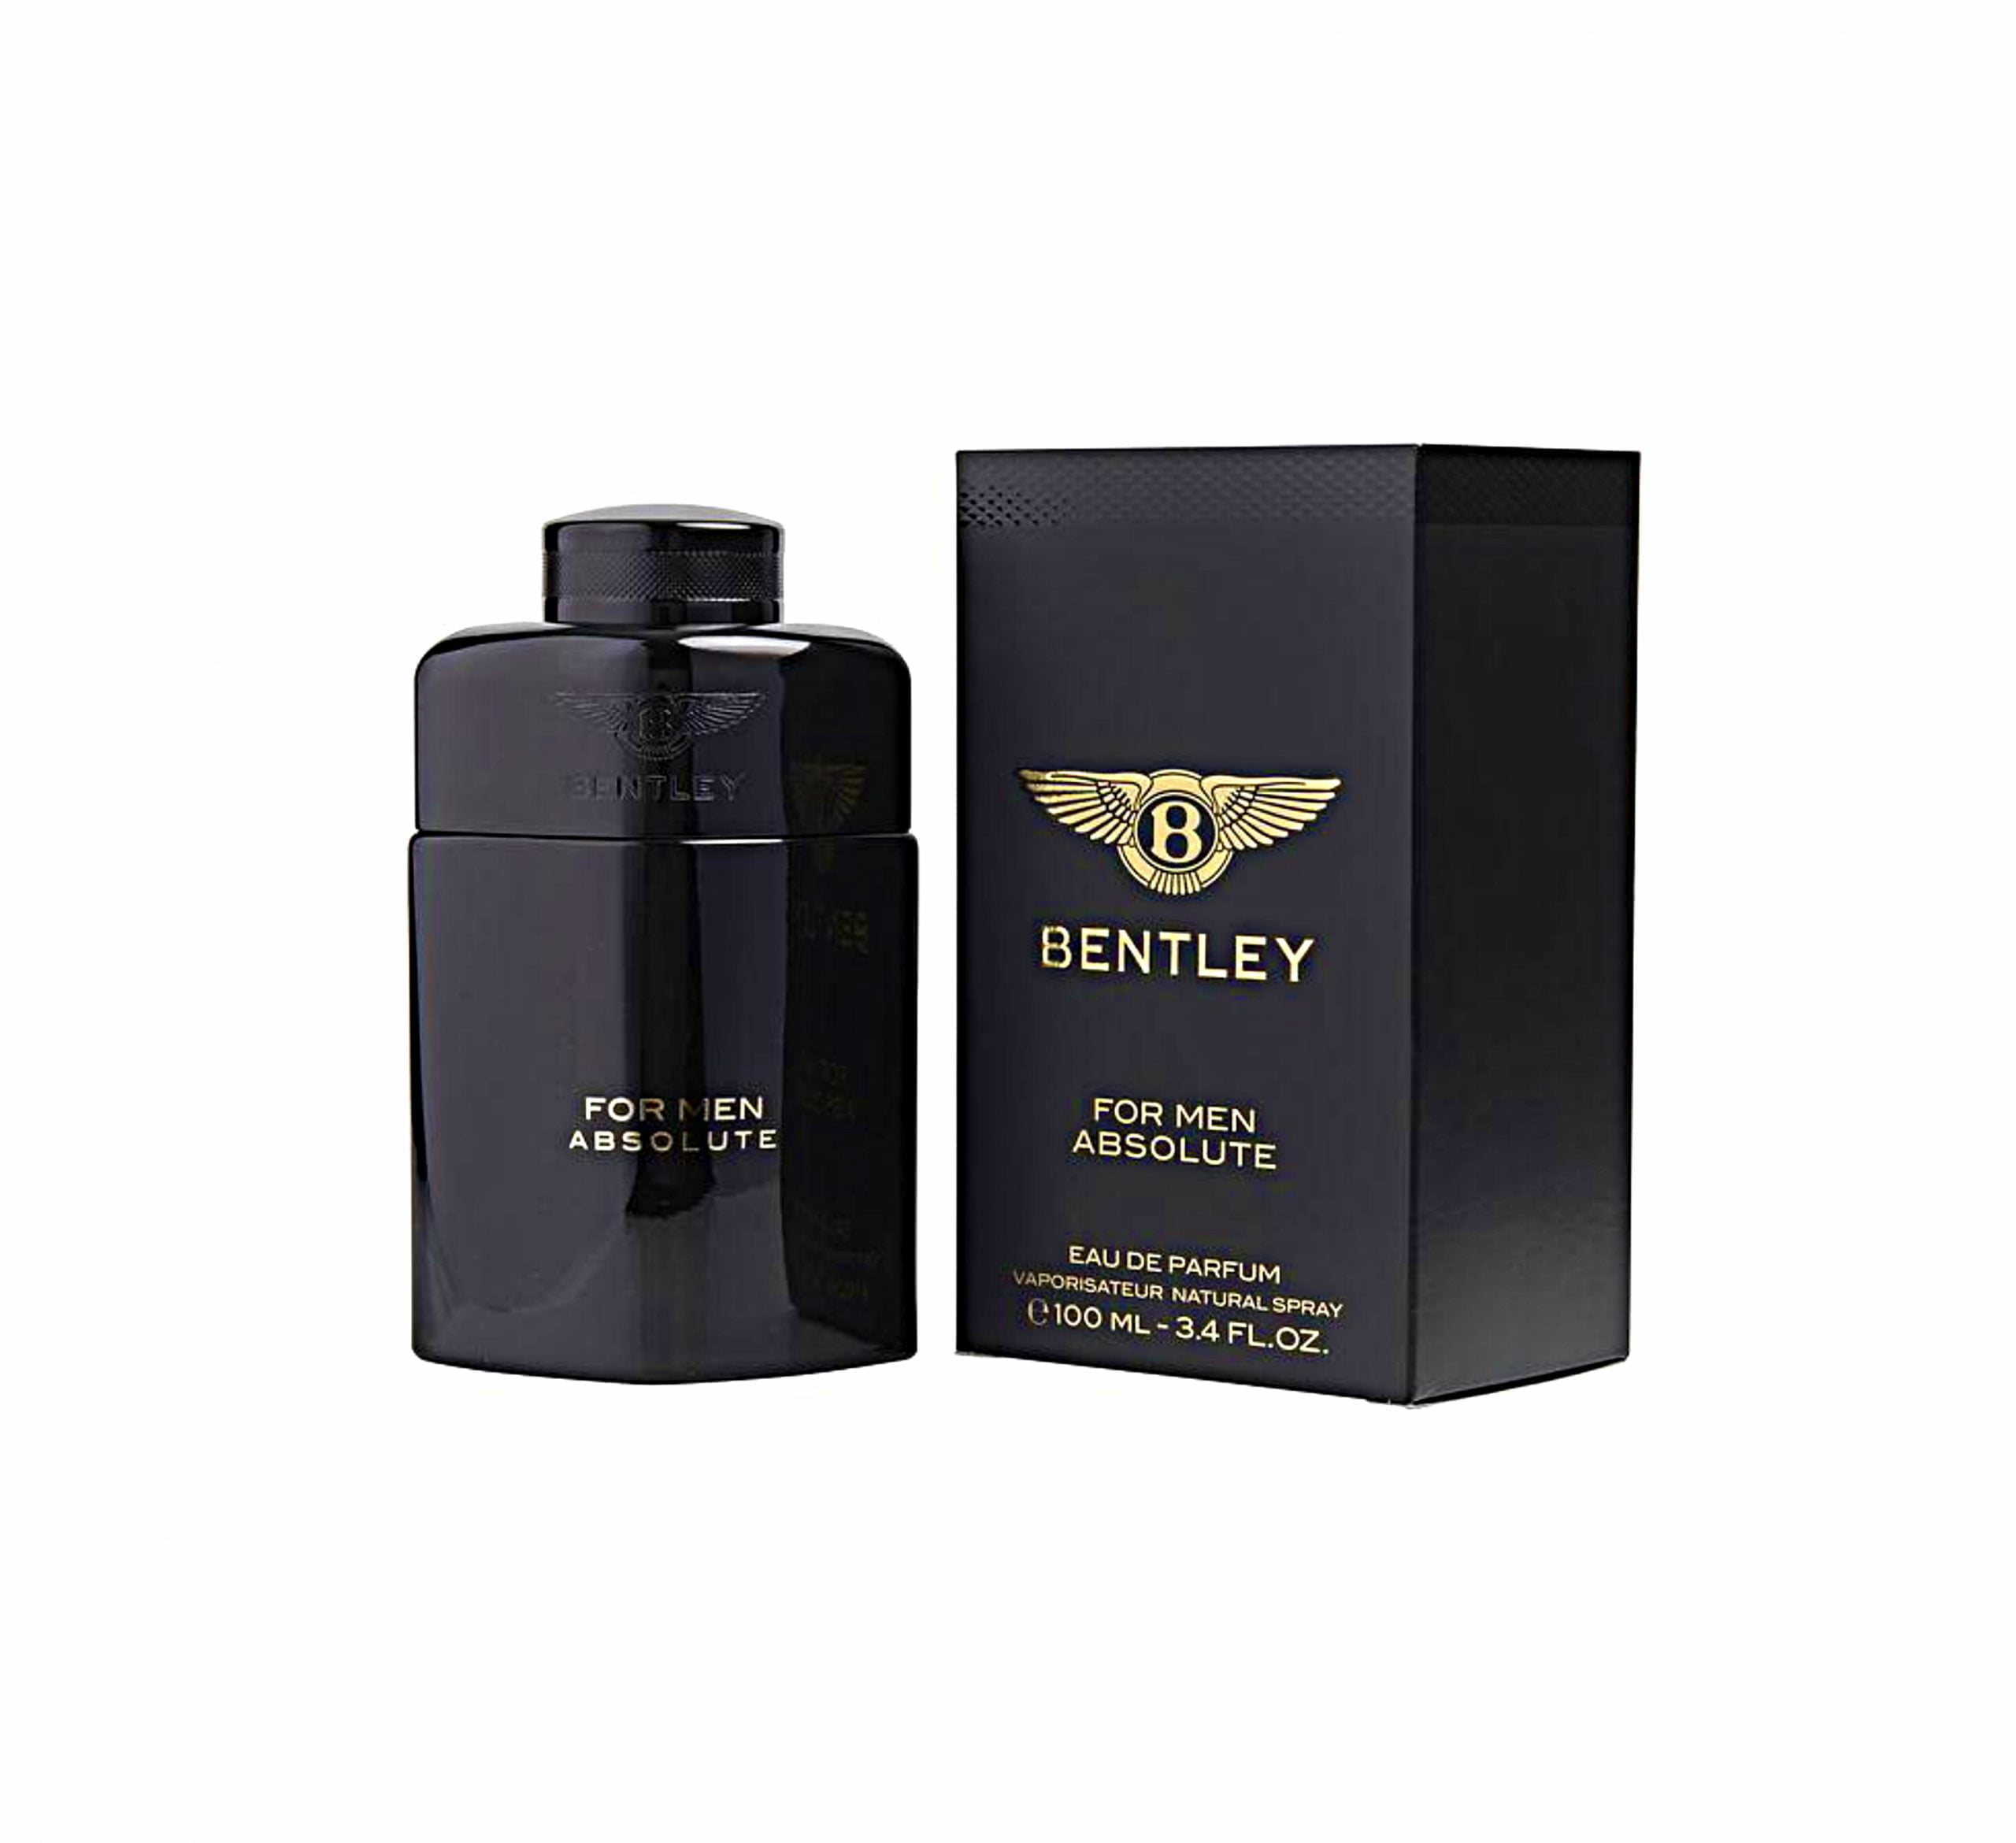 BENTLY FOR MEN ABSOLUTE